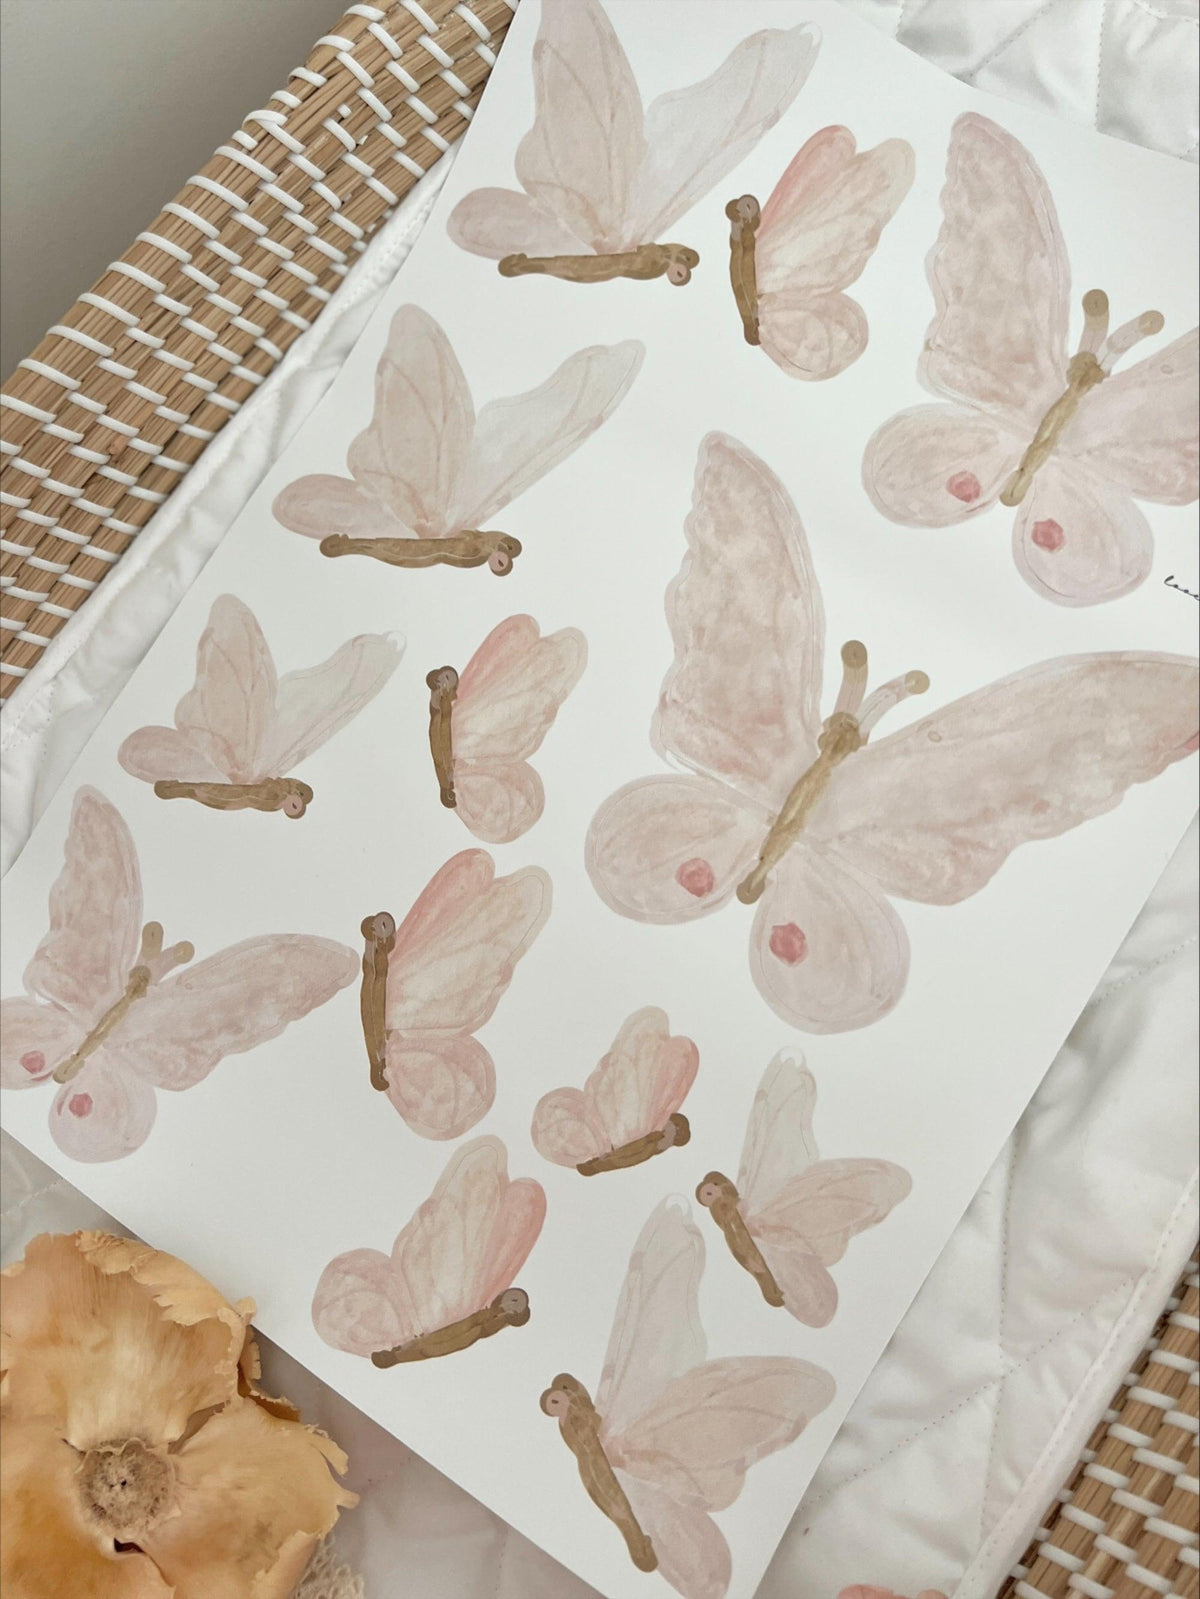 Butterfly Decals For Walls sheet